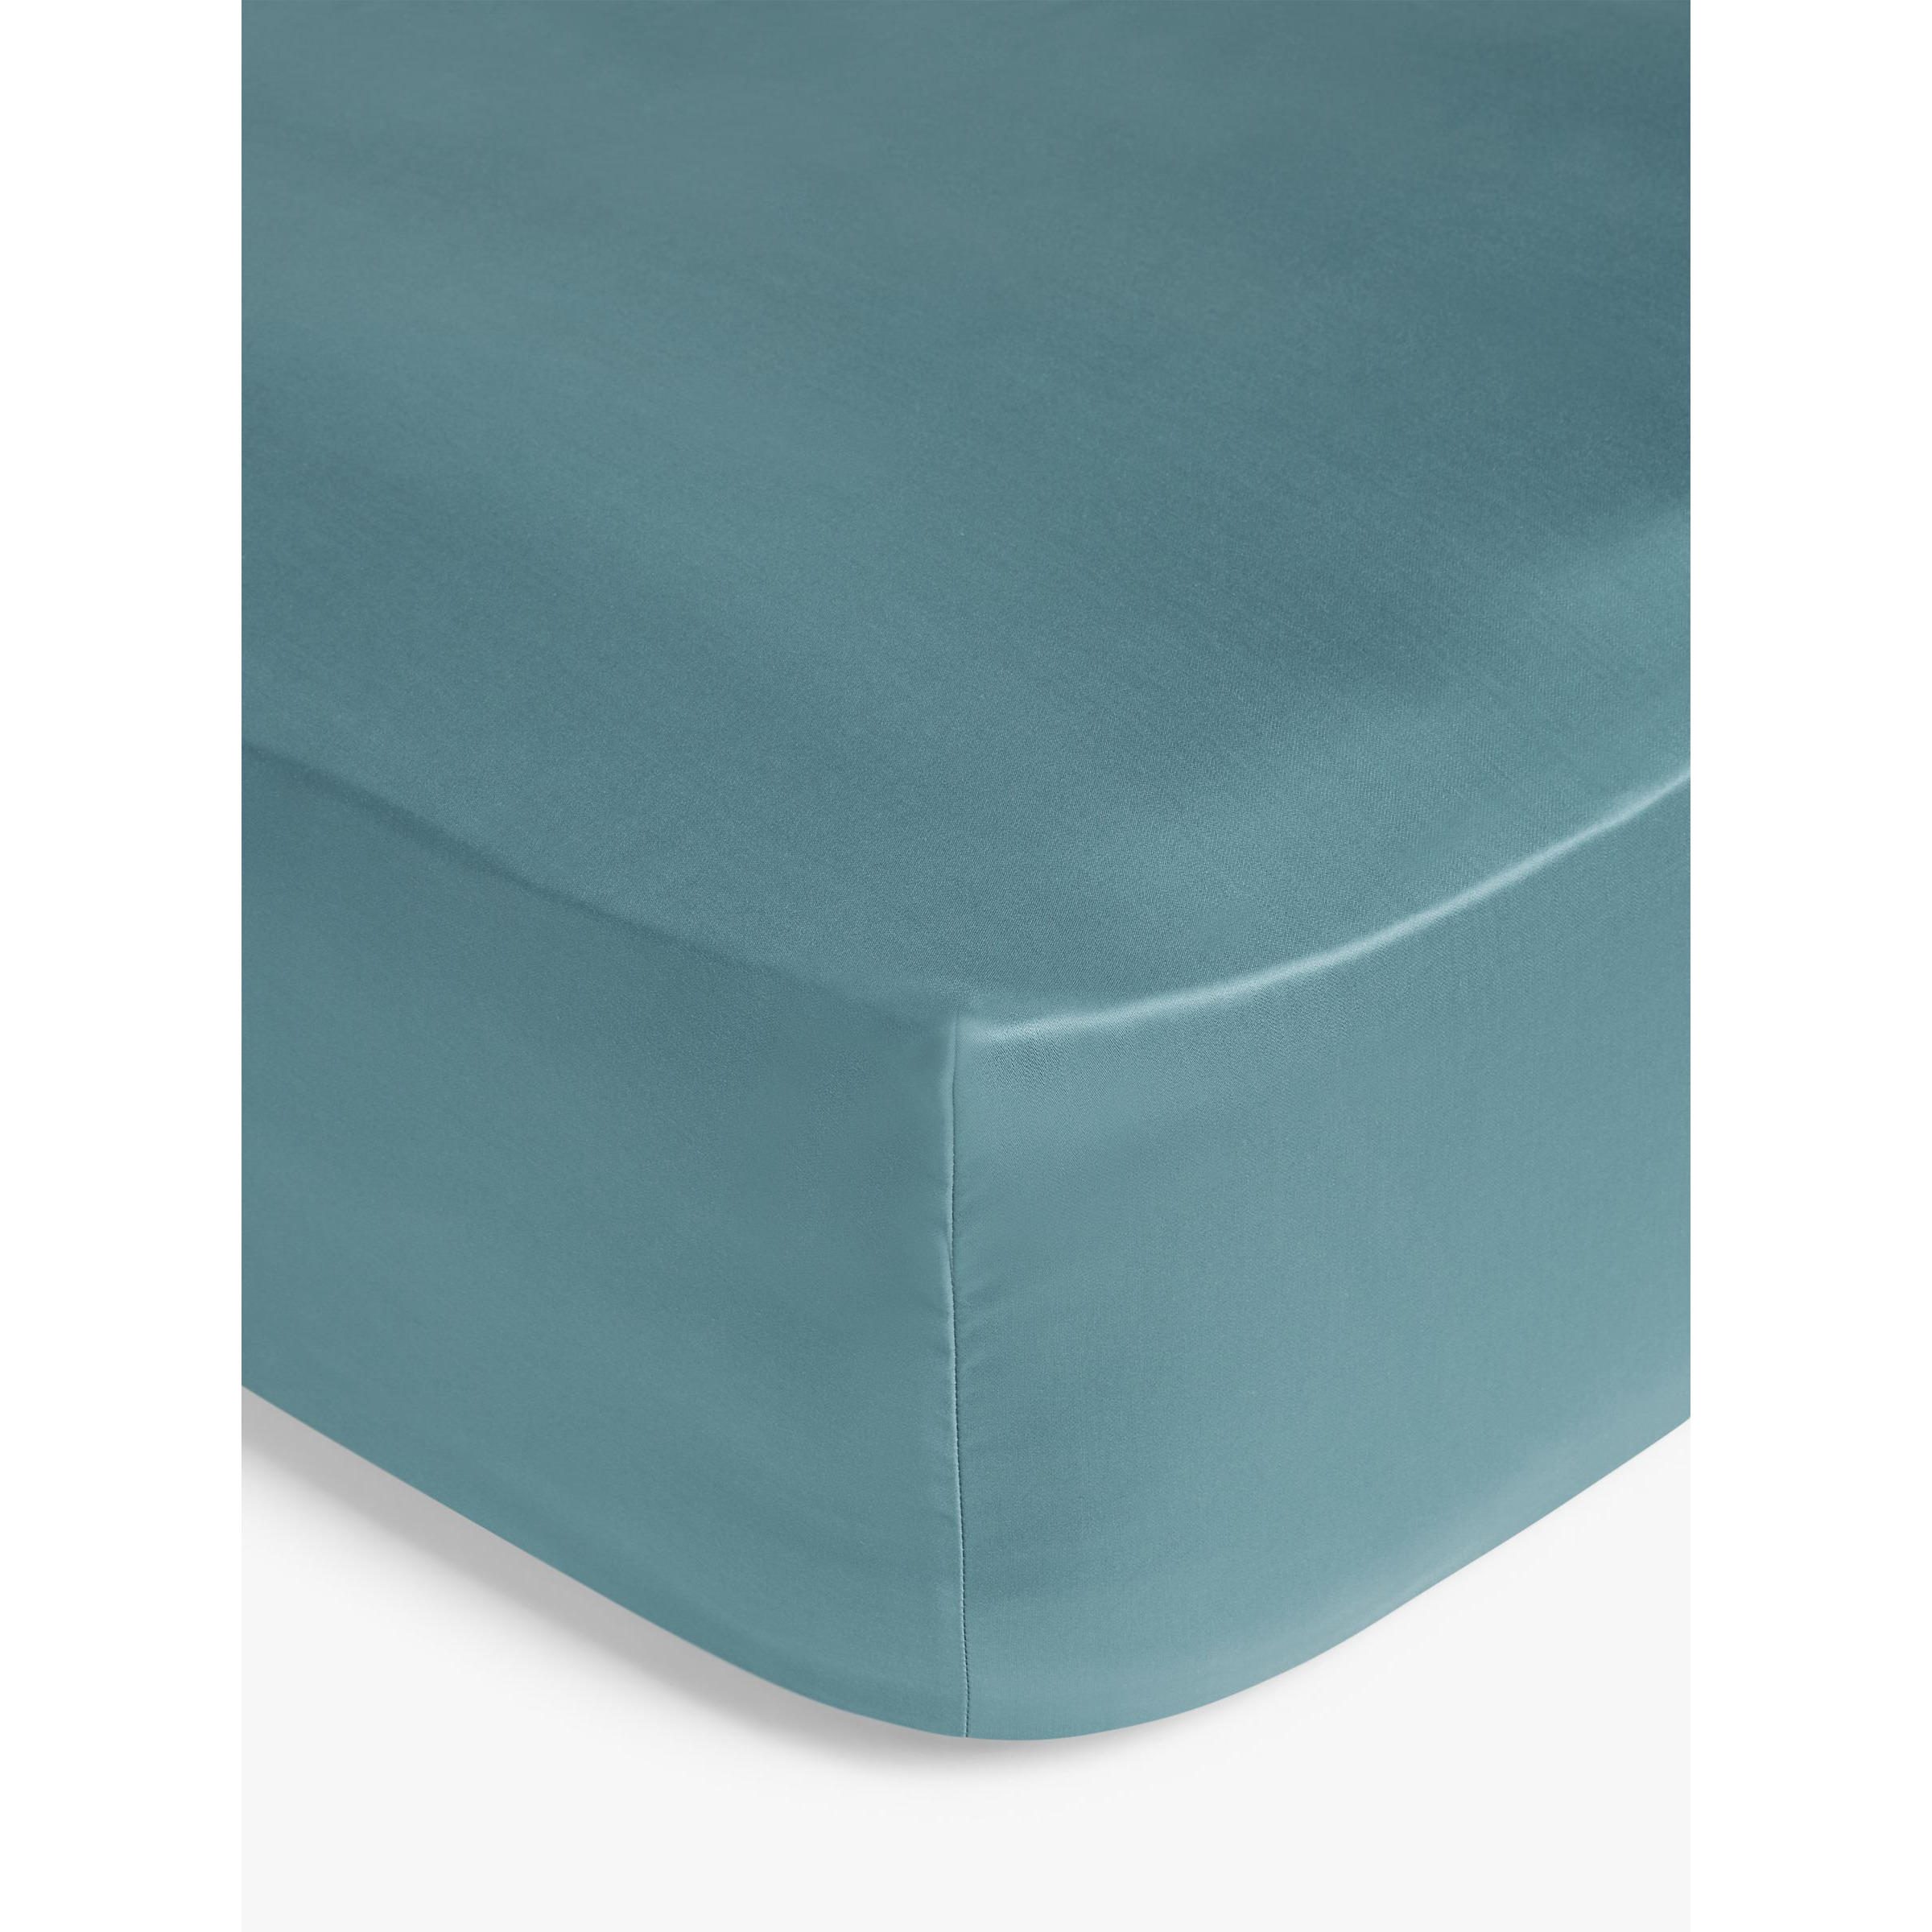 John Lewis Soft & Silky TENCEL™ 300 Thread Count Deep Fitted Sheet - image 1